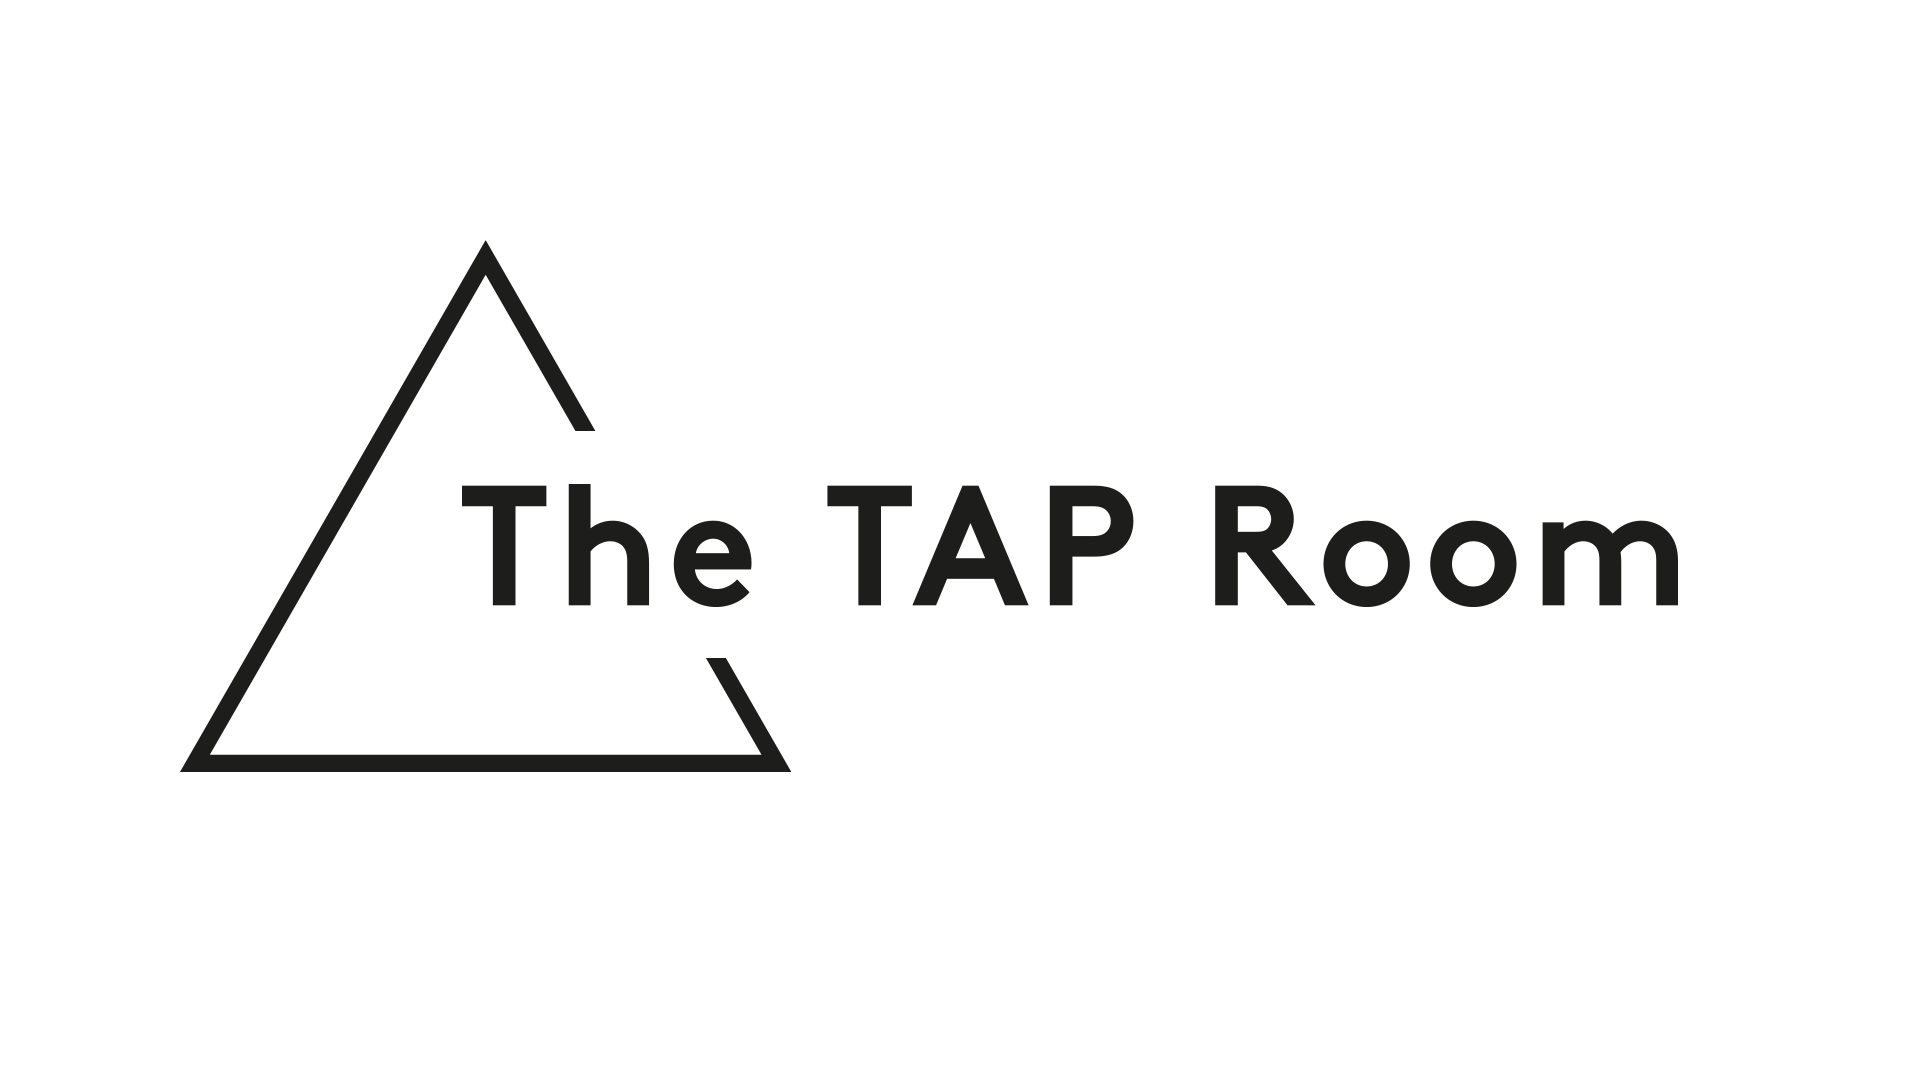 The TAP Room